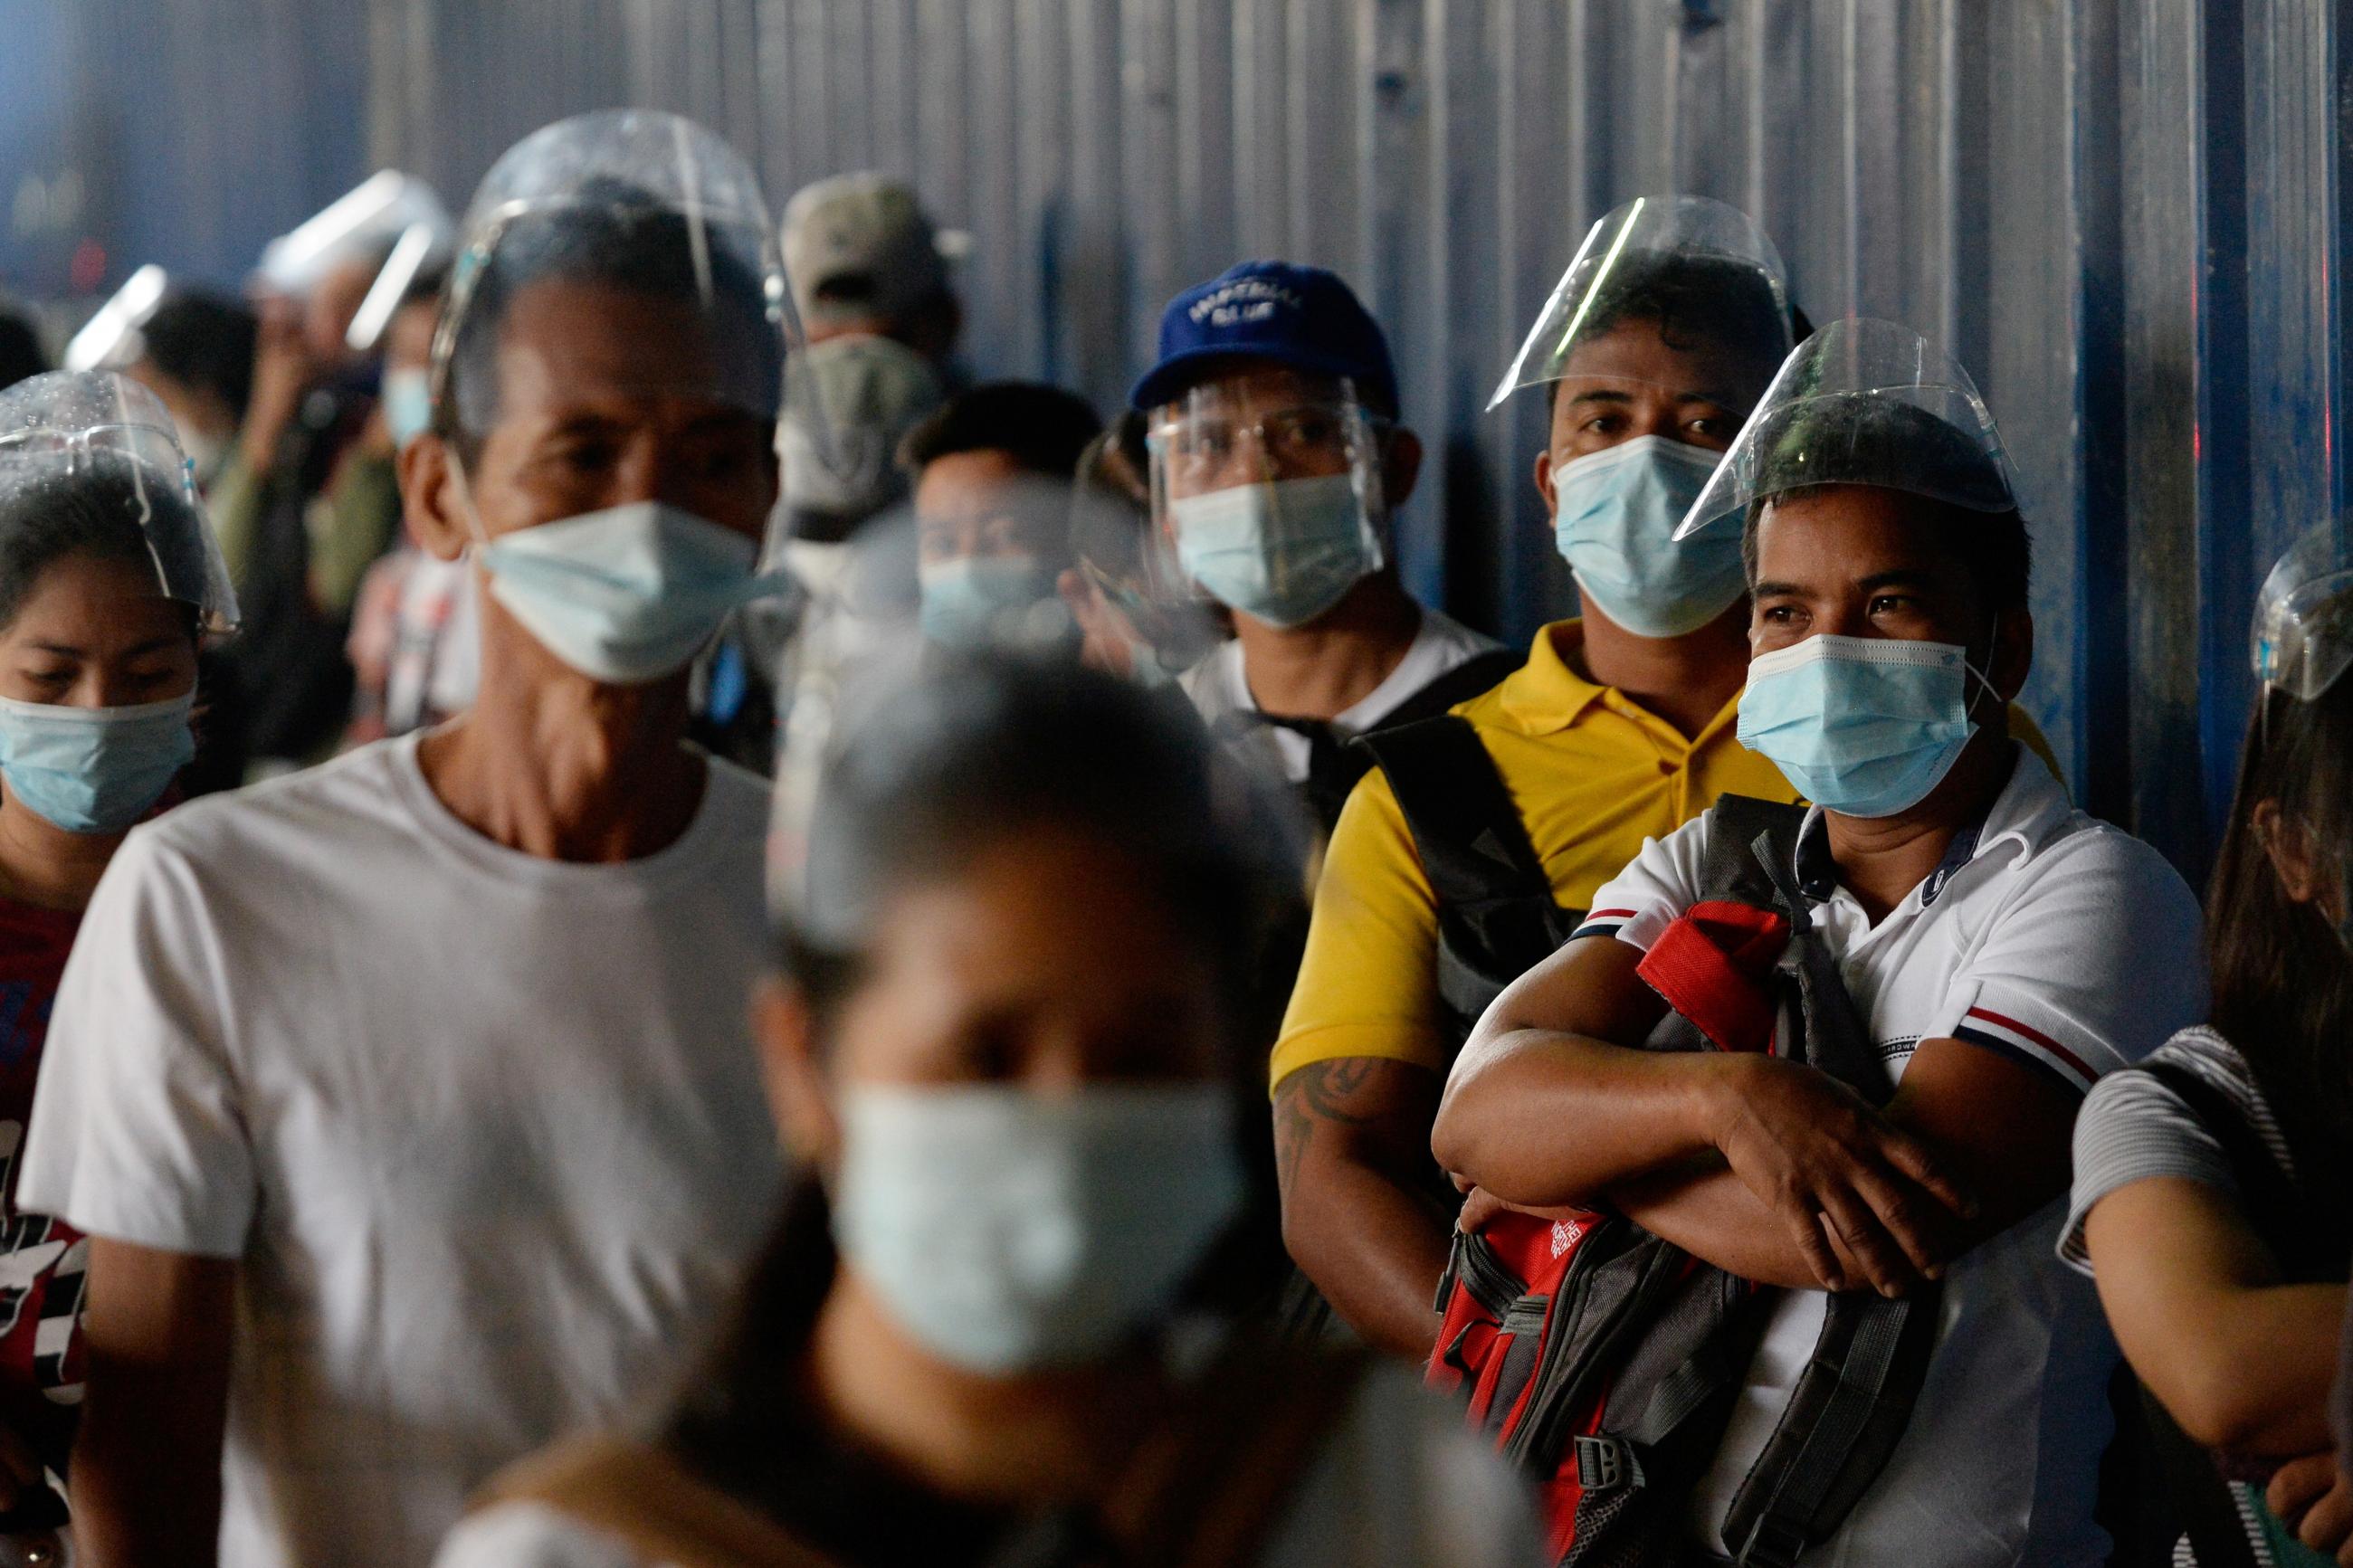 People wearing face masks as protection against the coronavirus disease (COVID-19) queue outside a government office, in Caloocan City, Metro Manila, Philippines, February 1, 2021. 